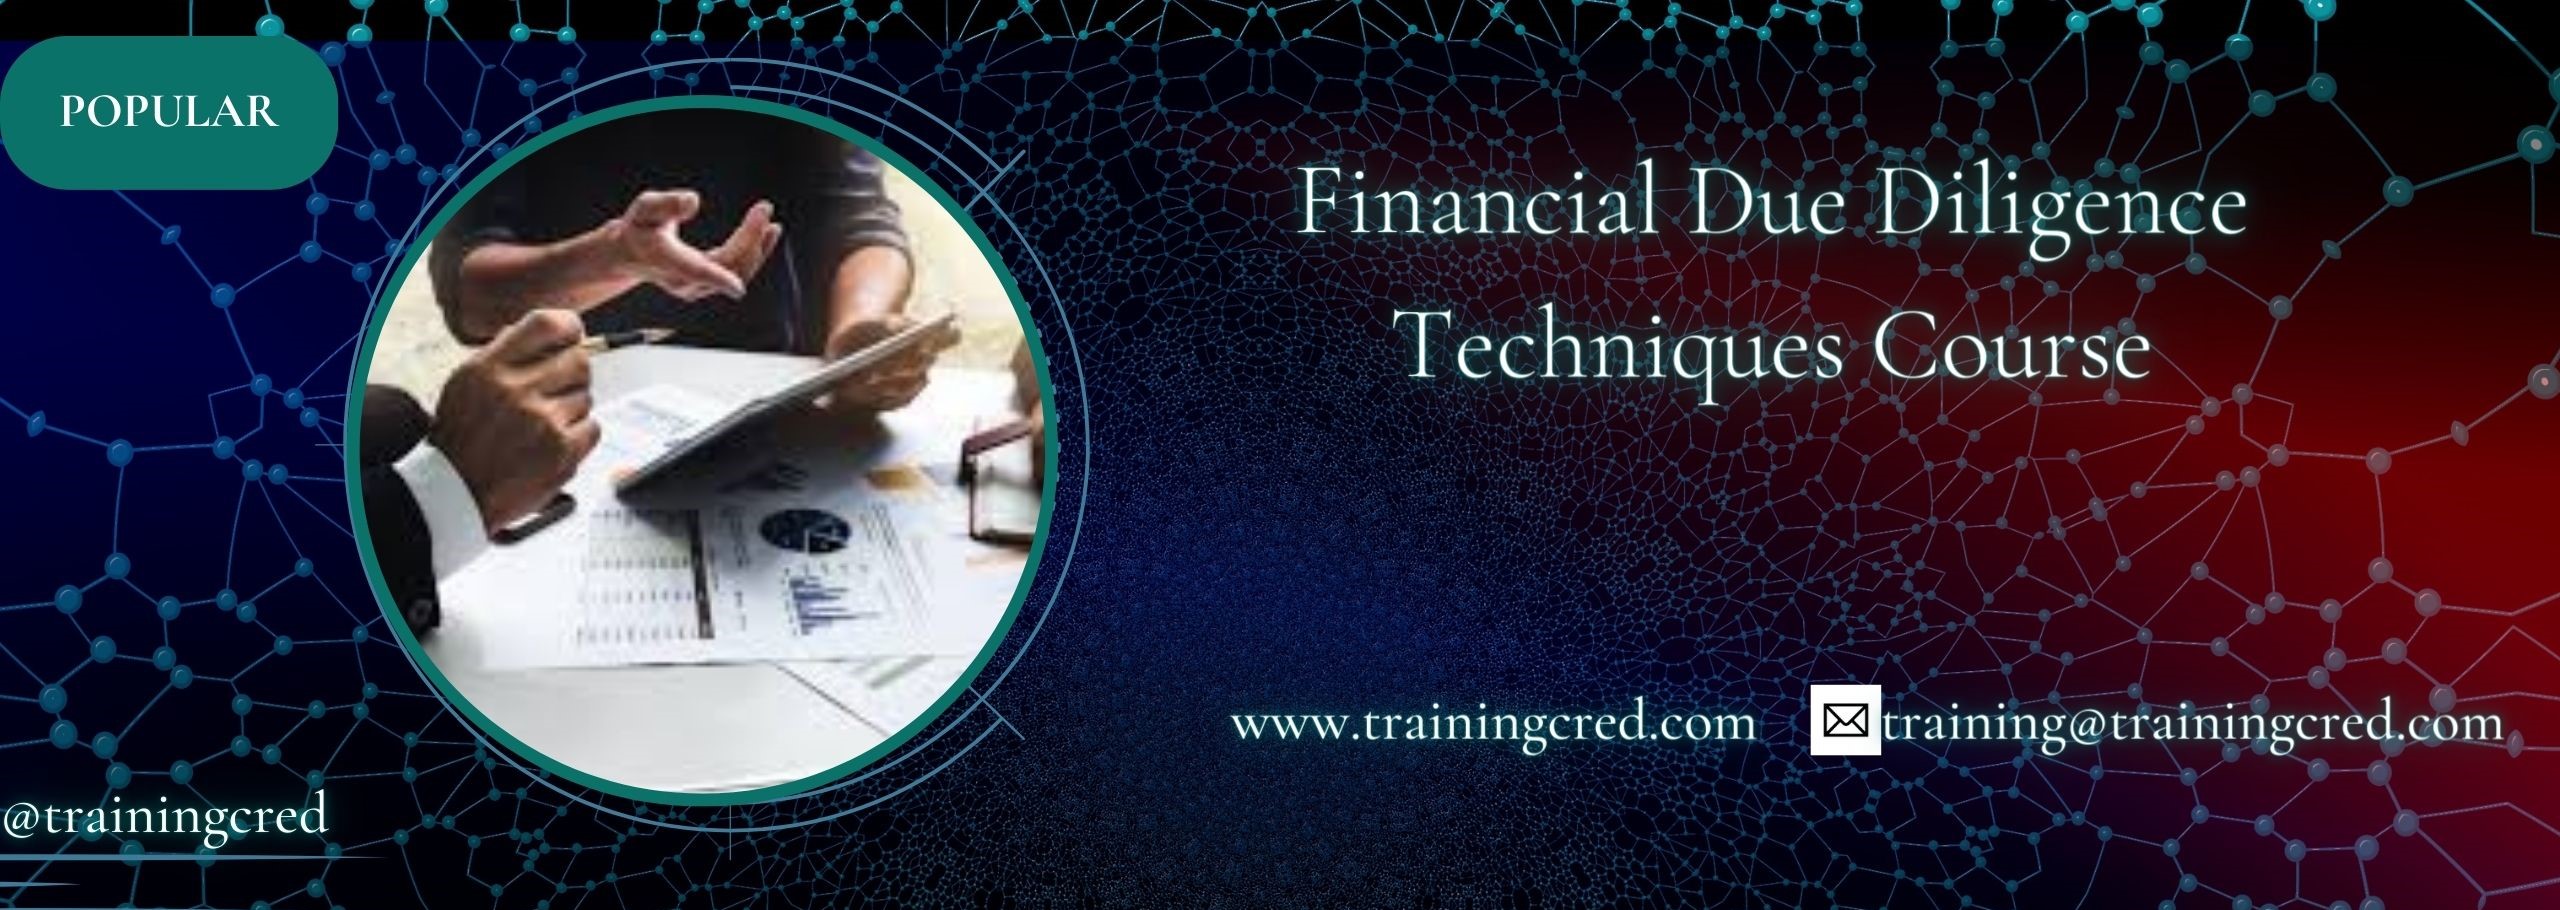 Financial Due Diligence Techniques Training